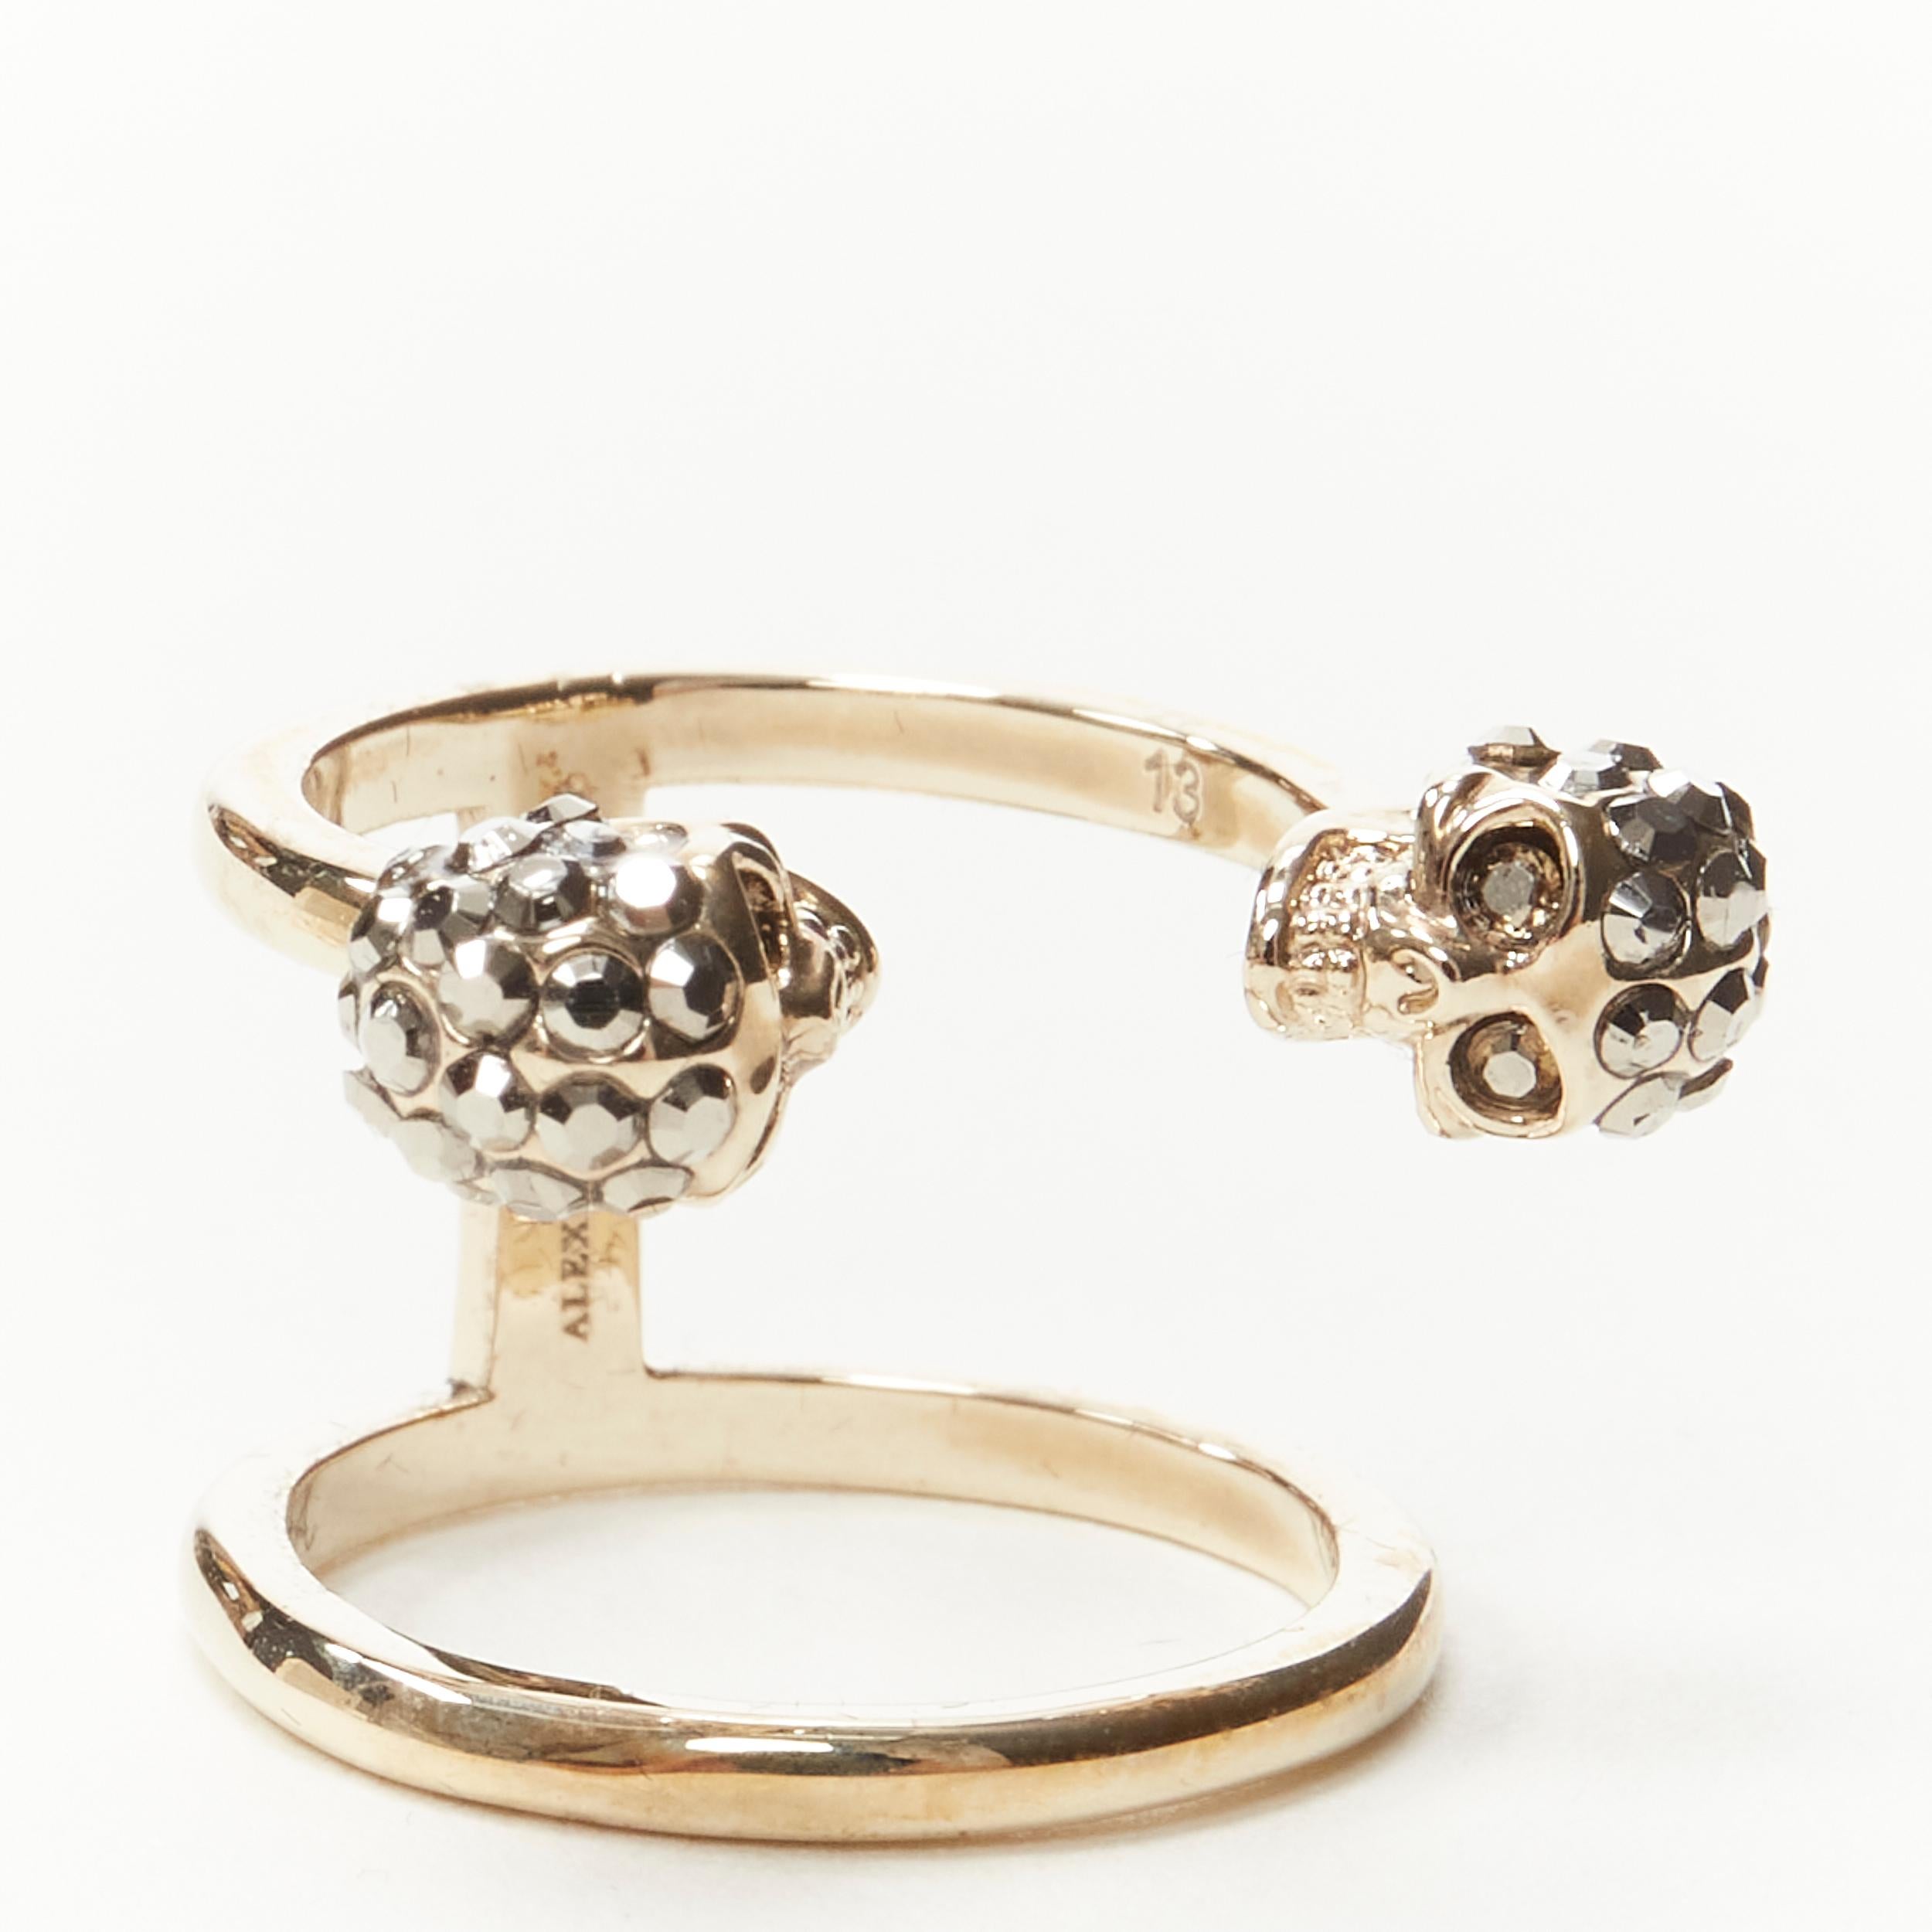 ALEXANDER MCQUEEN crystal encrusted double skull gold tone double ring 6.5 
Reference: KEDG/A00021 
Brand: Alexander McQueen 
Material: Metal 
Color: Gold 
Pattern: Solid 
Made in: Italy 

CONDITION: 
Condition: Excellent, this item was pre-owned